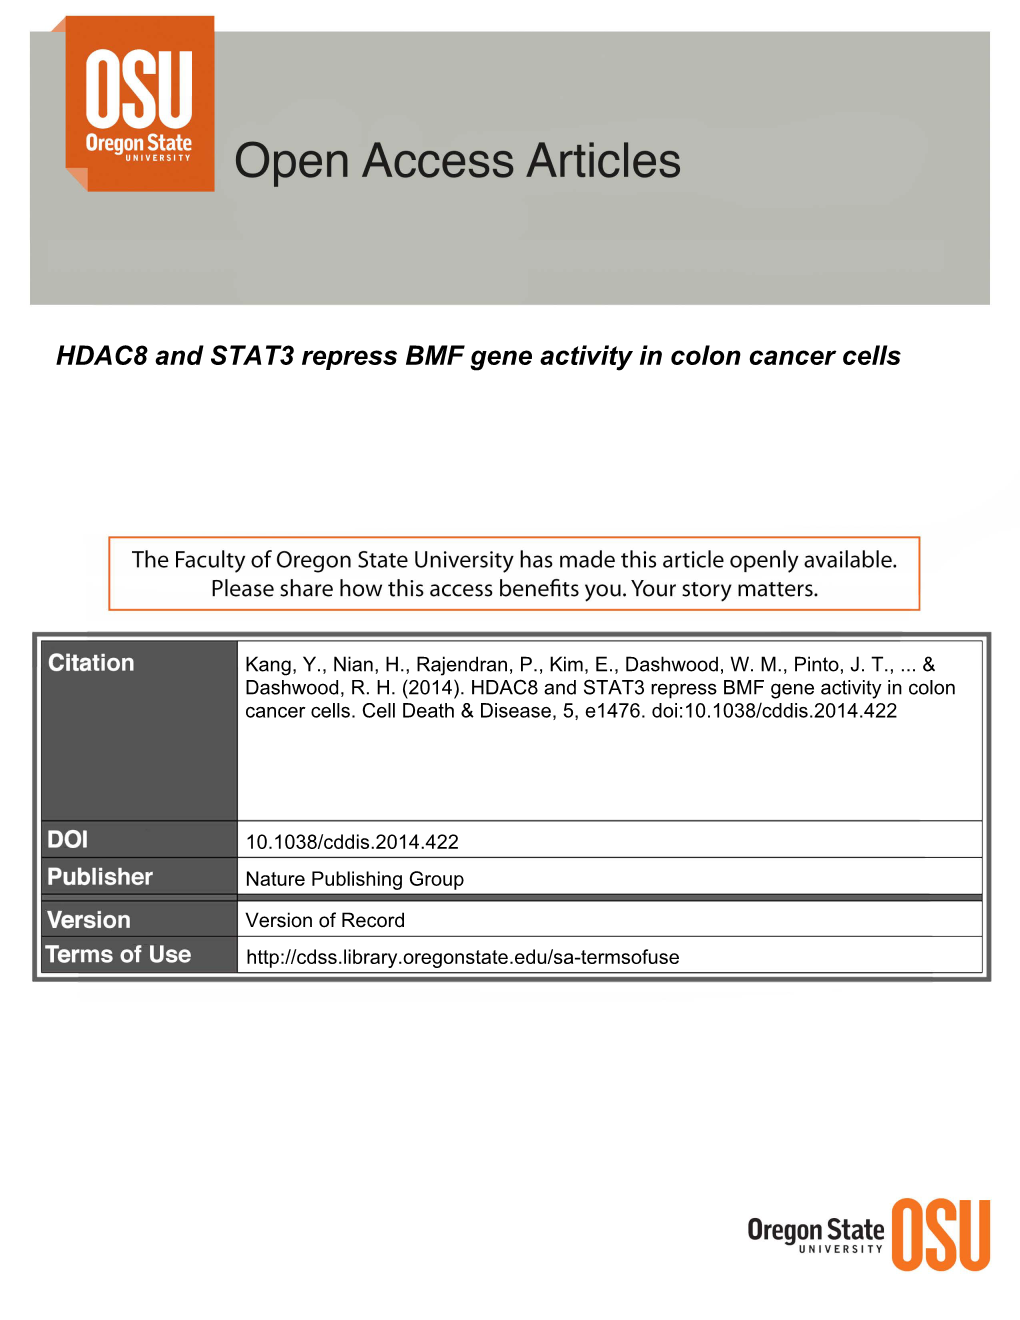 HDAC8 and STAT3 Repress BMF Gene Activity in Colon Cancer Cells